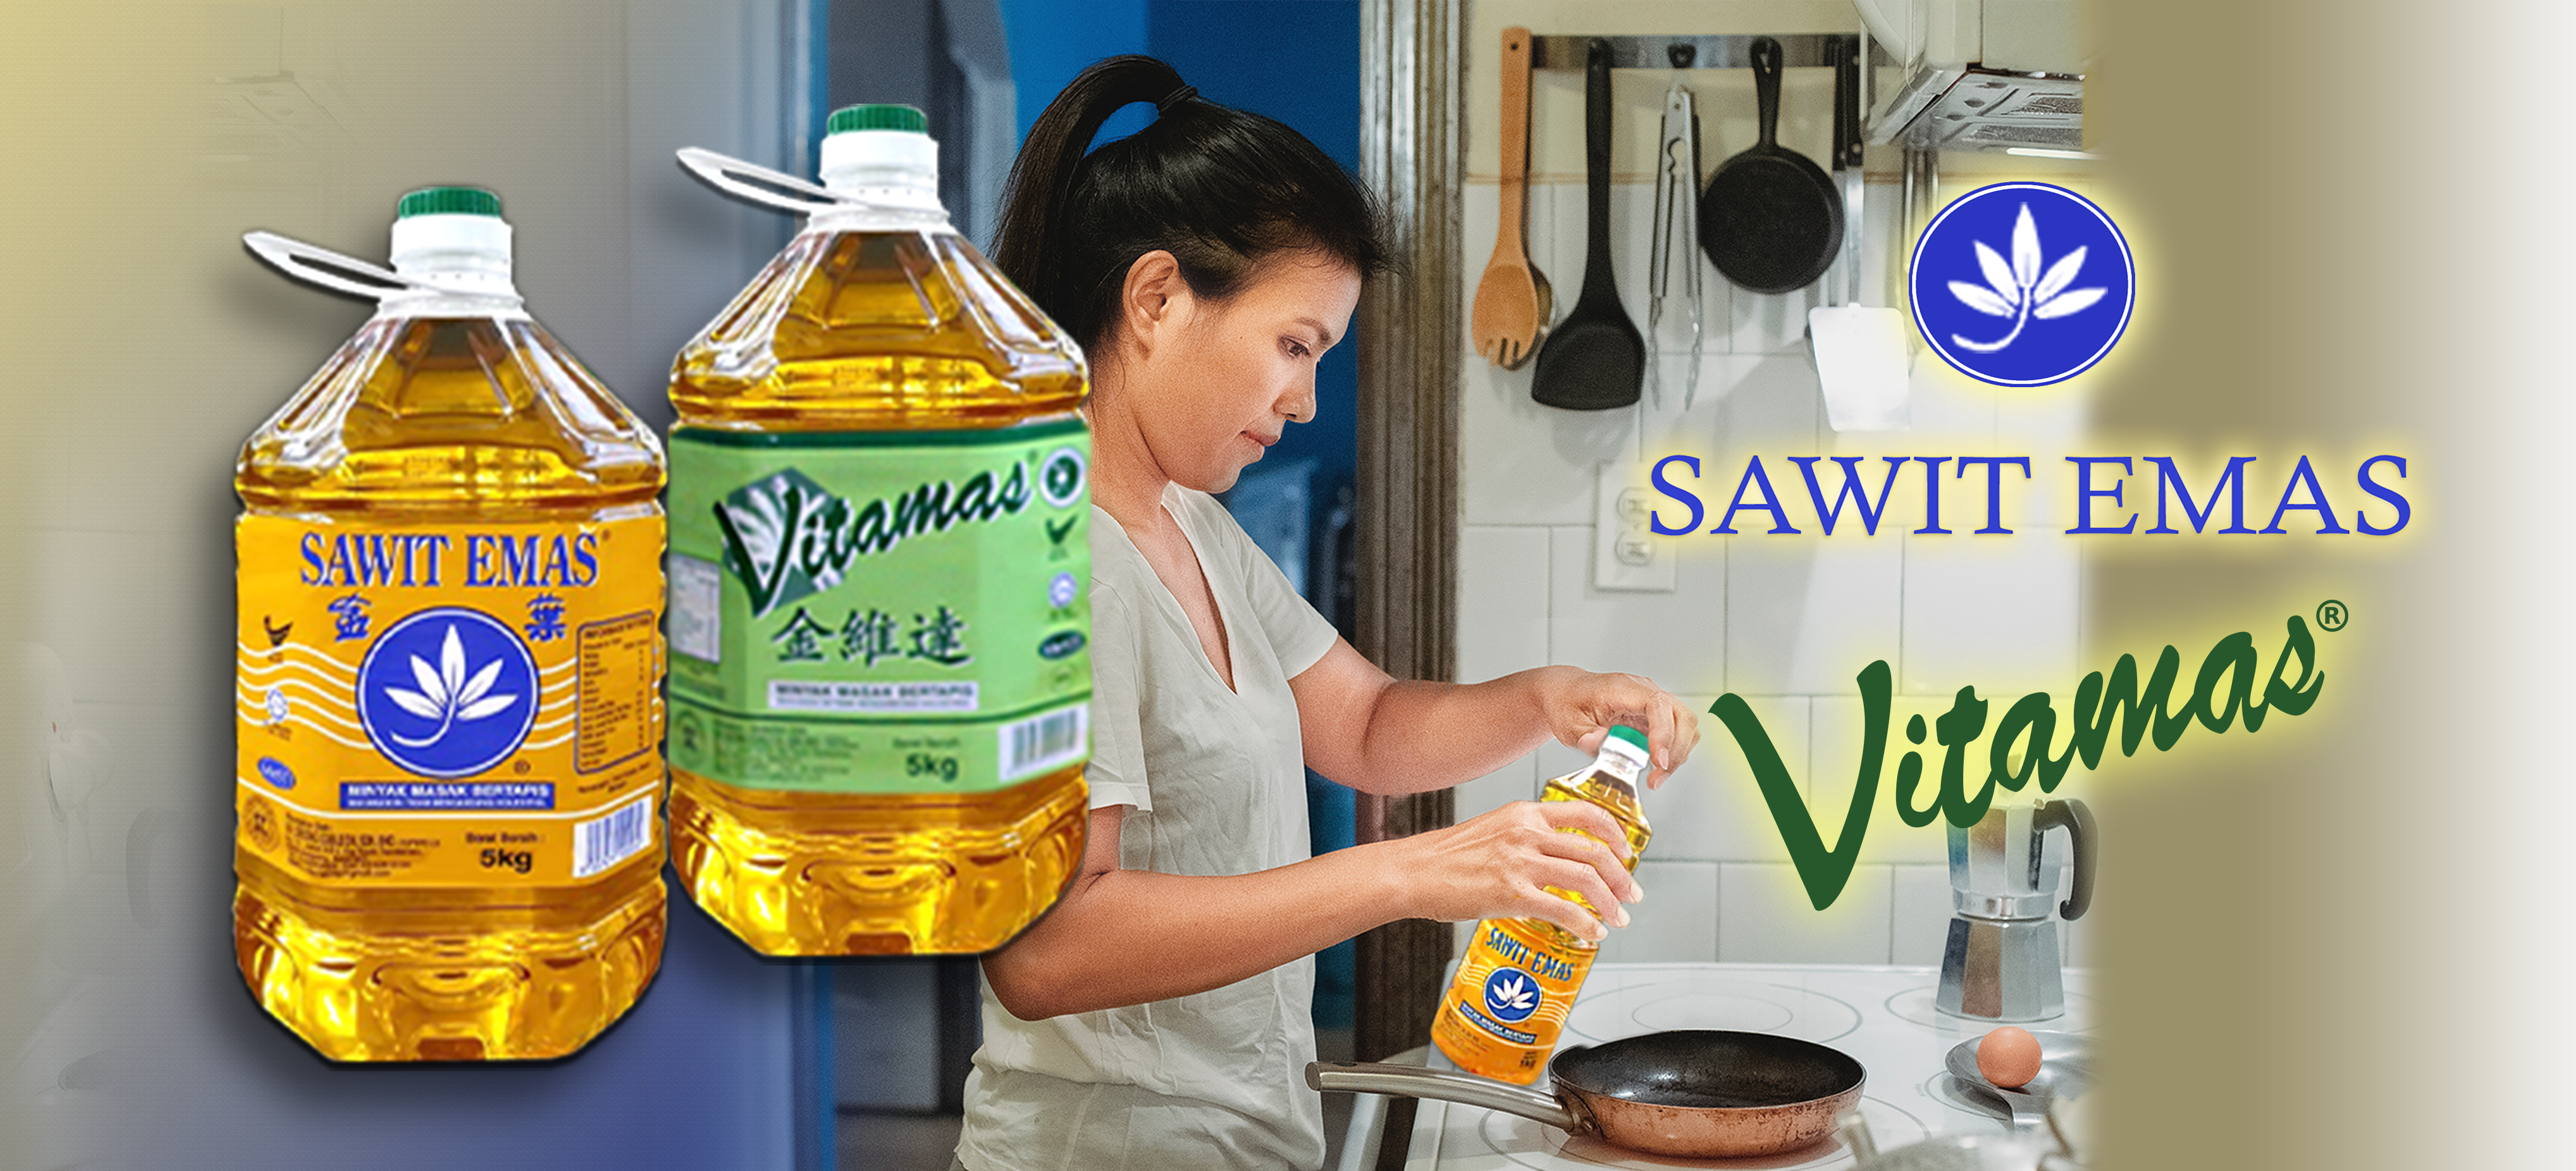 Sawit Emas, Vitamas, Sik Cheong Edible Oil, Sik Cheong, Cooking oil malaysia, cooking oil supply malaysia, cooking oil kl, palm oil malaysia, palm oil supply malaysia